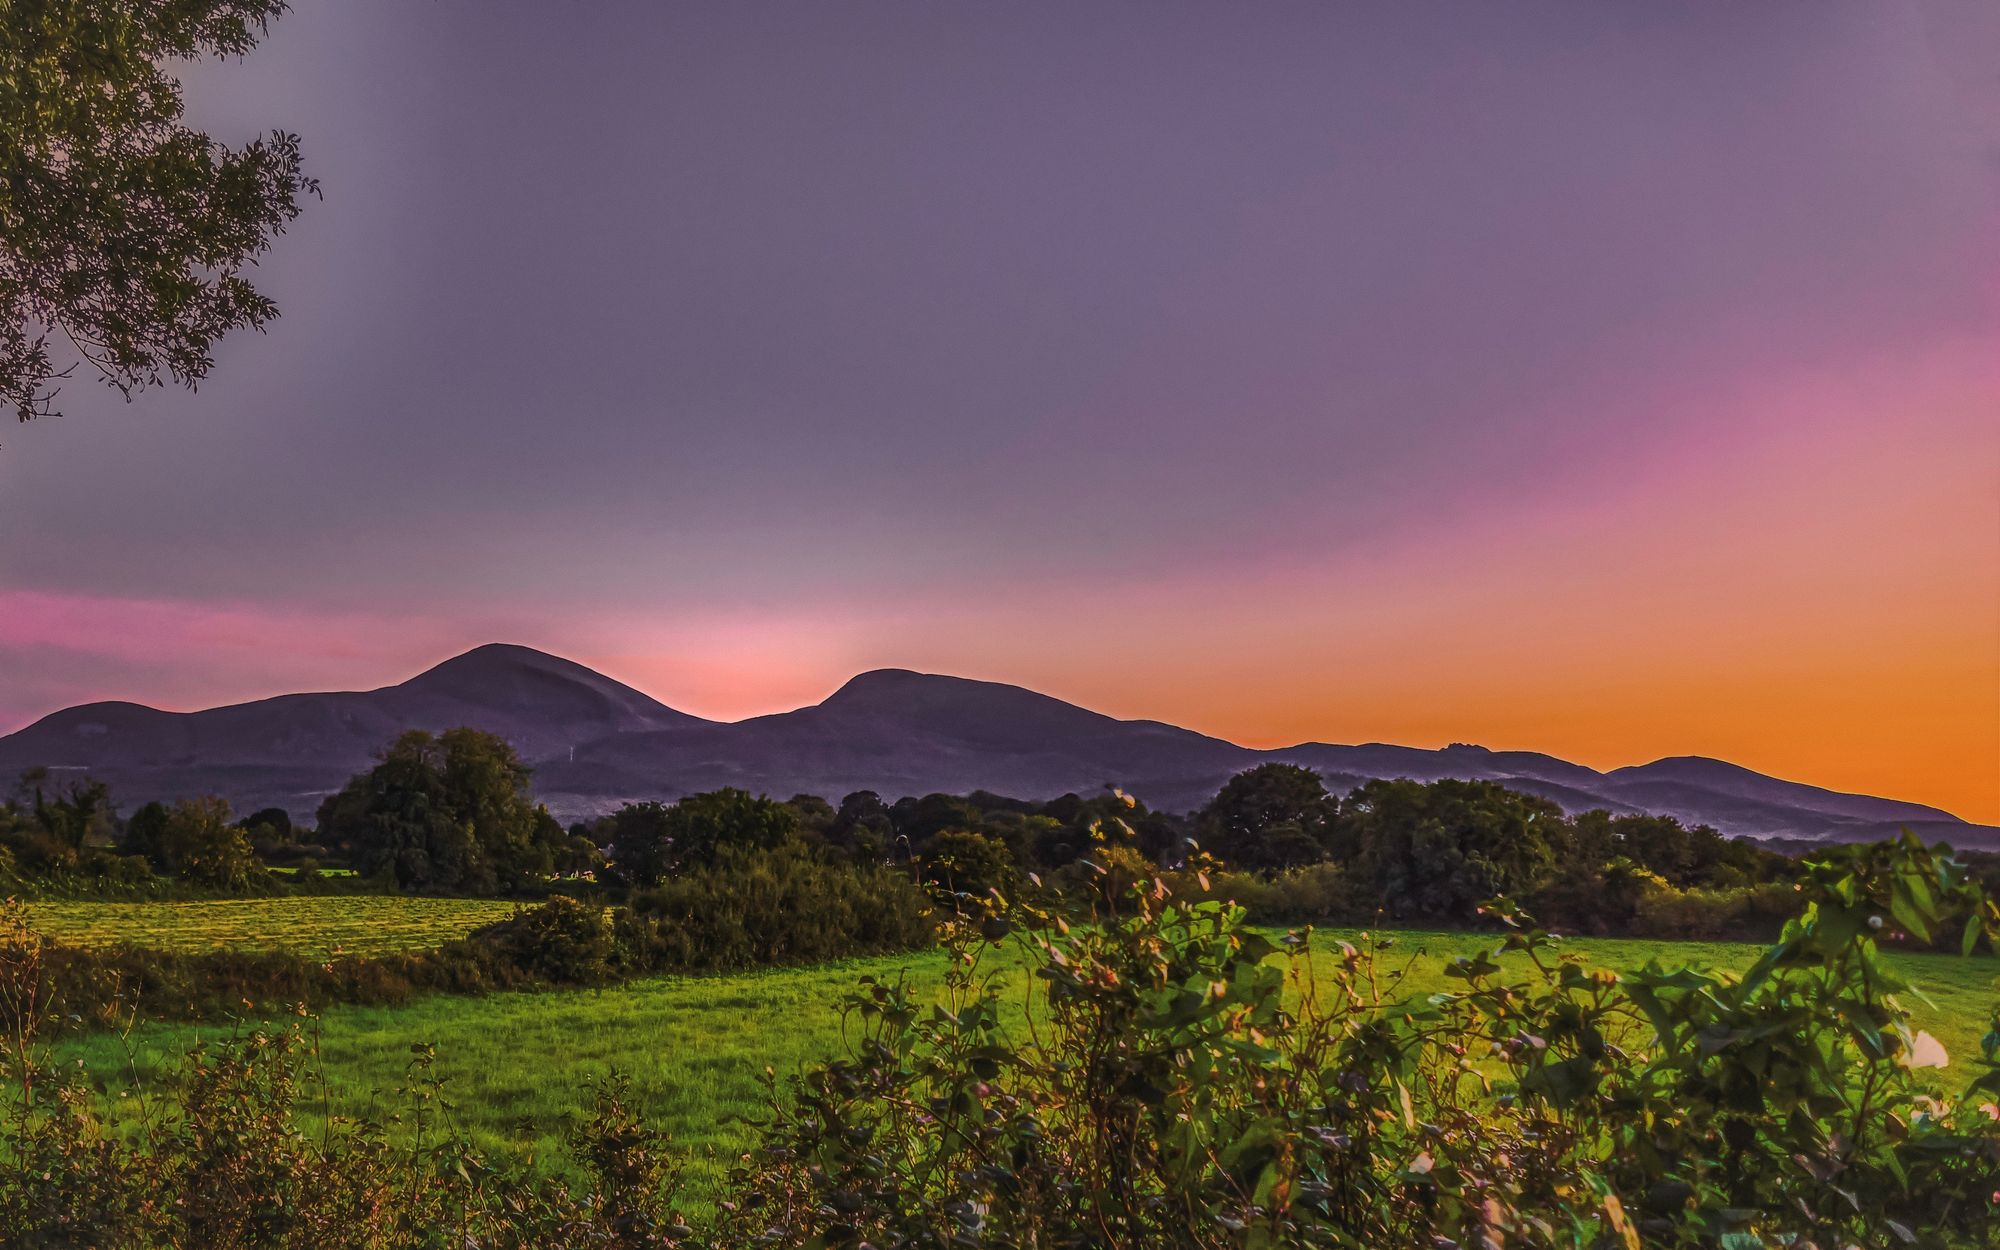 Sunset over the Mourne Mountains, Slieve Donard and Slieve Commedagh